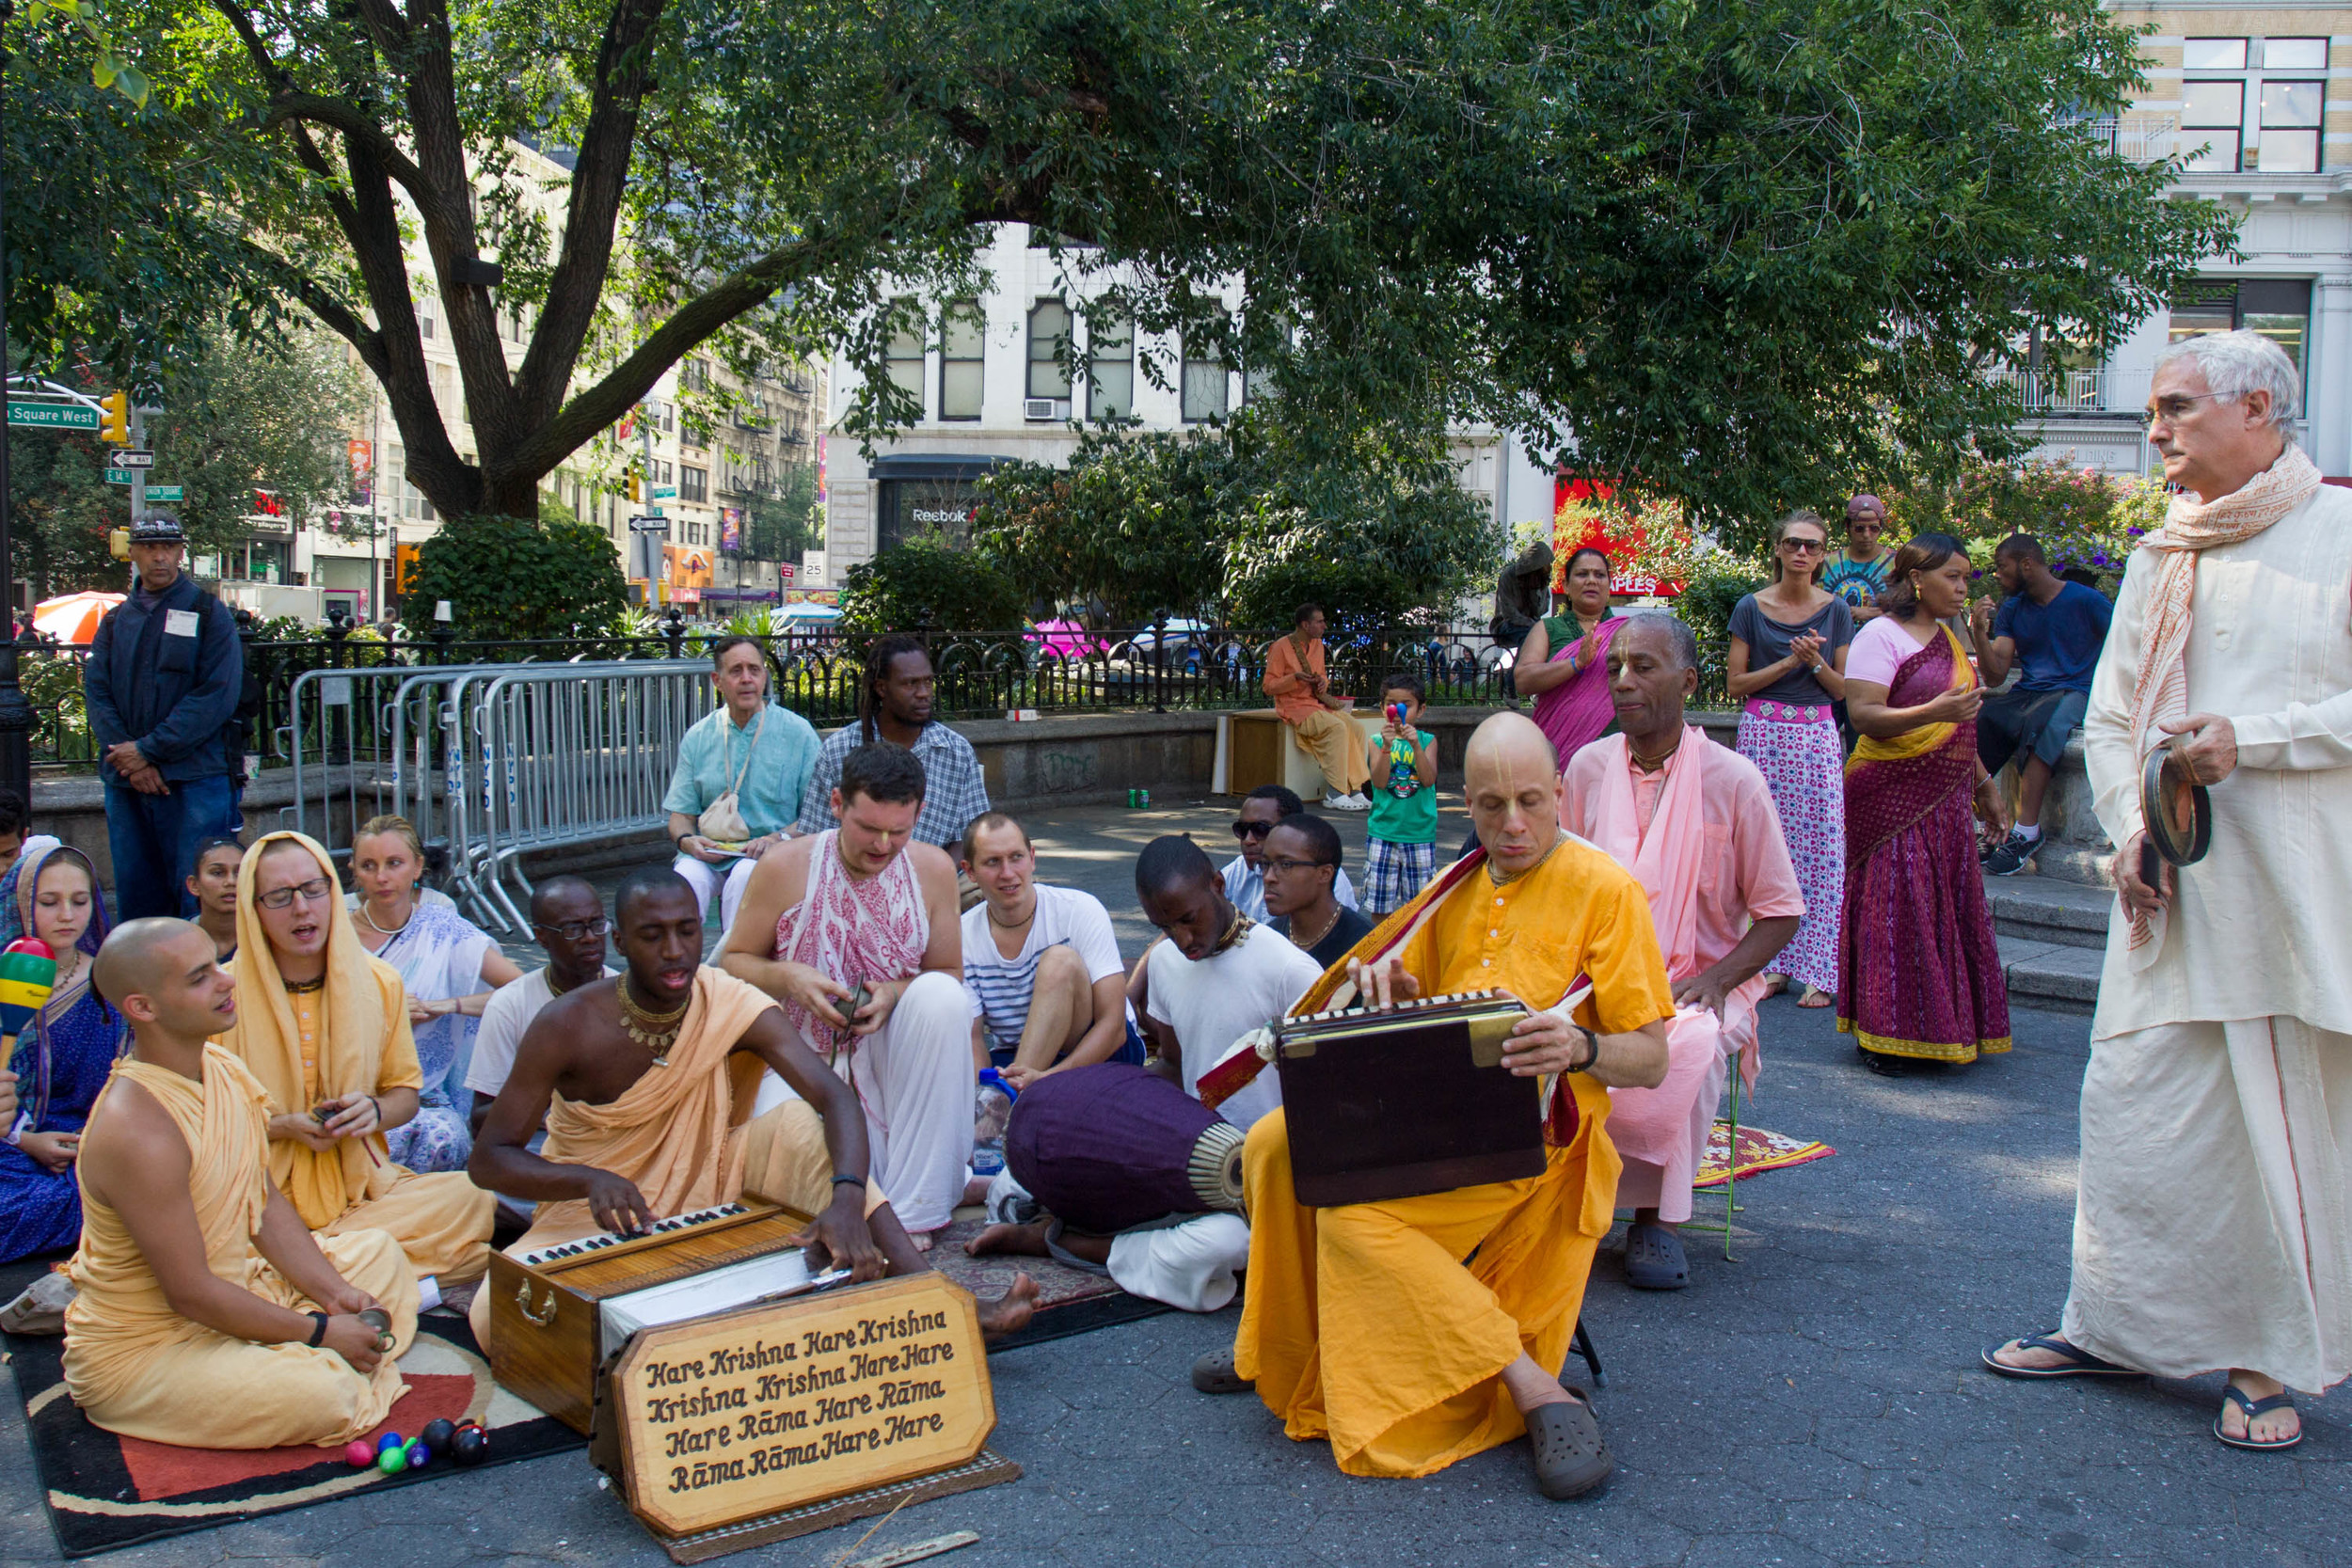  Hare Krishna devotees sit together and chant in Union Square 